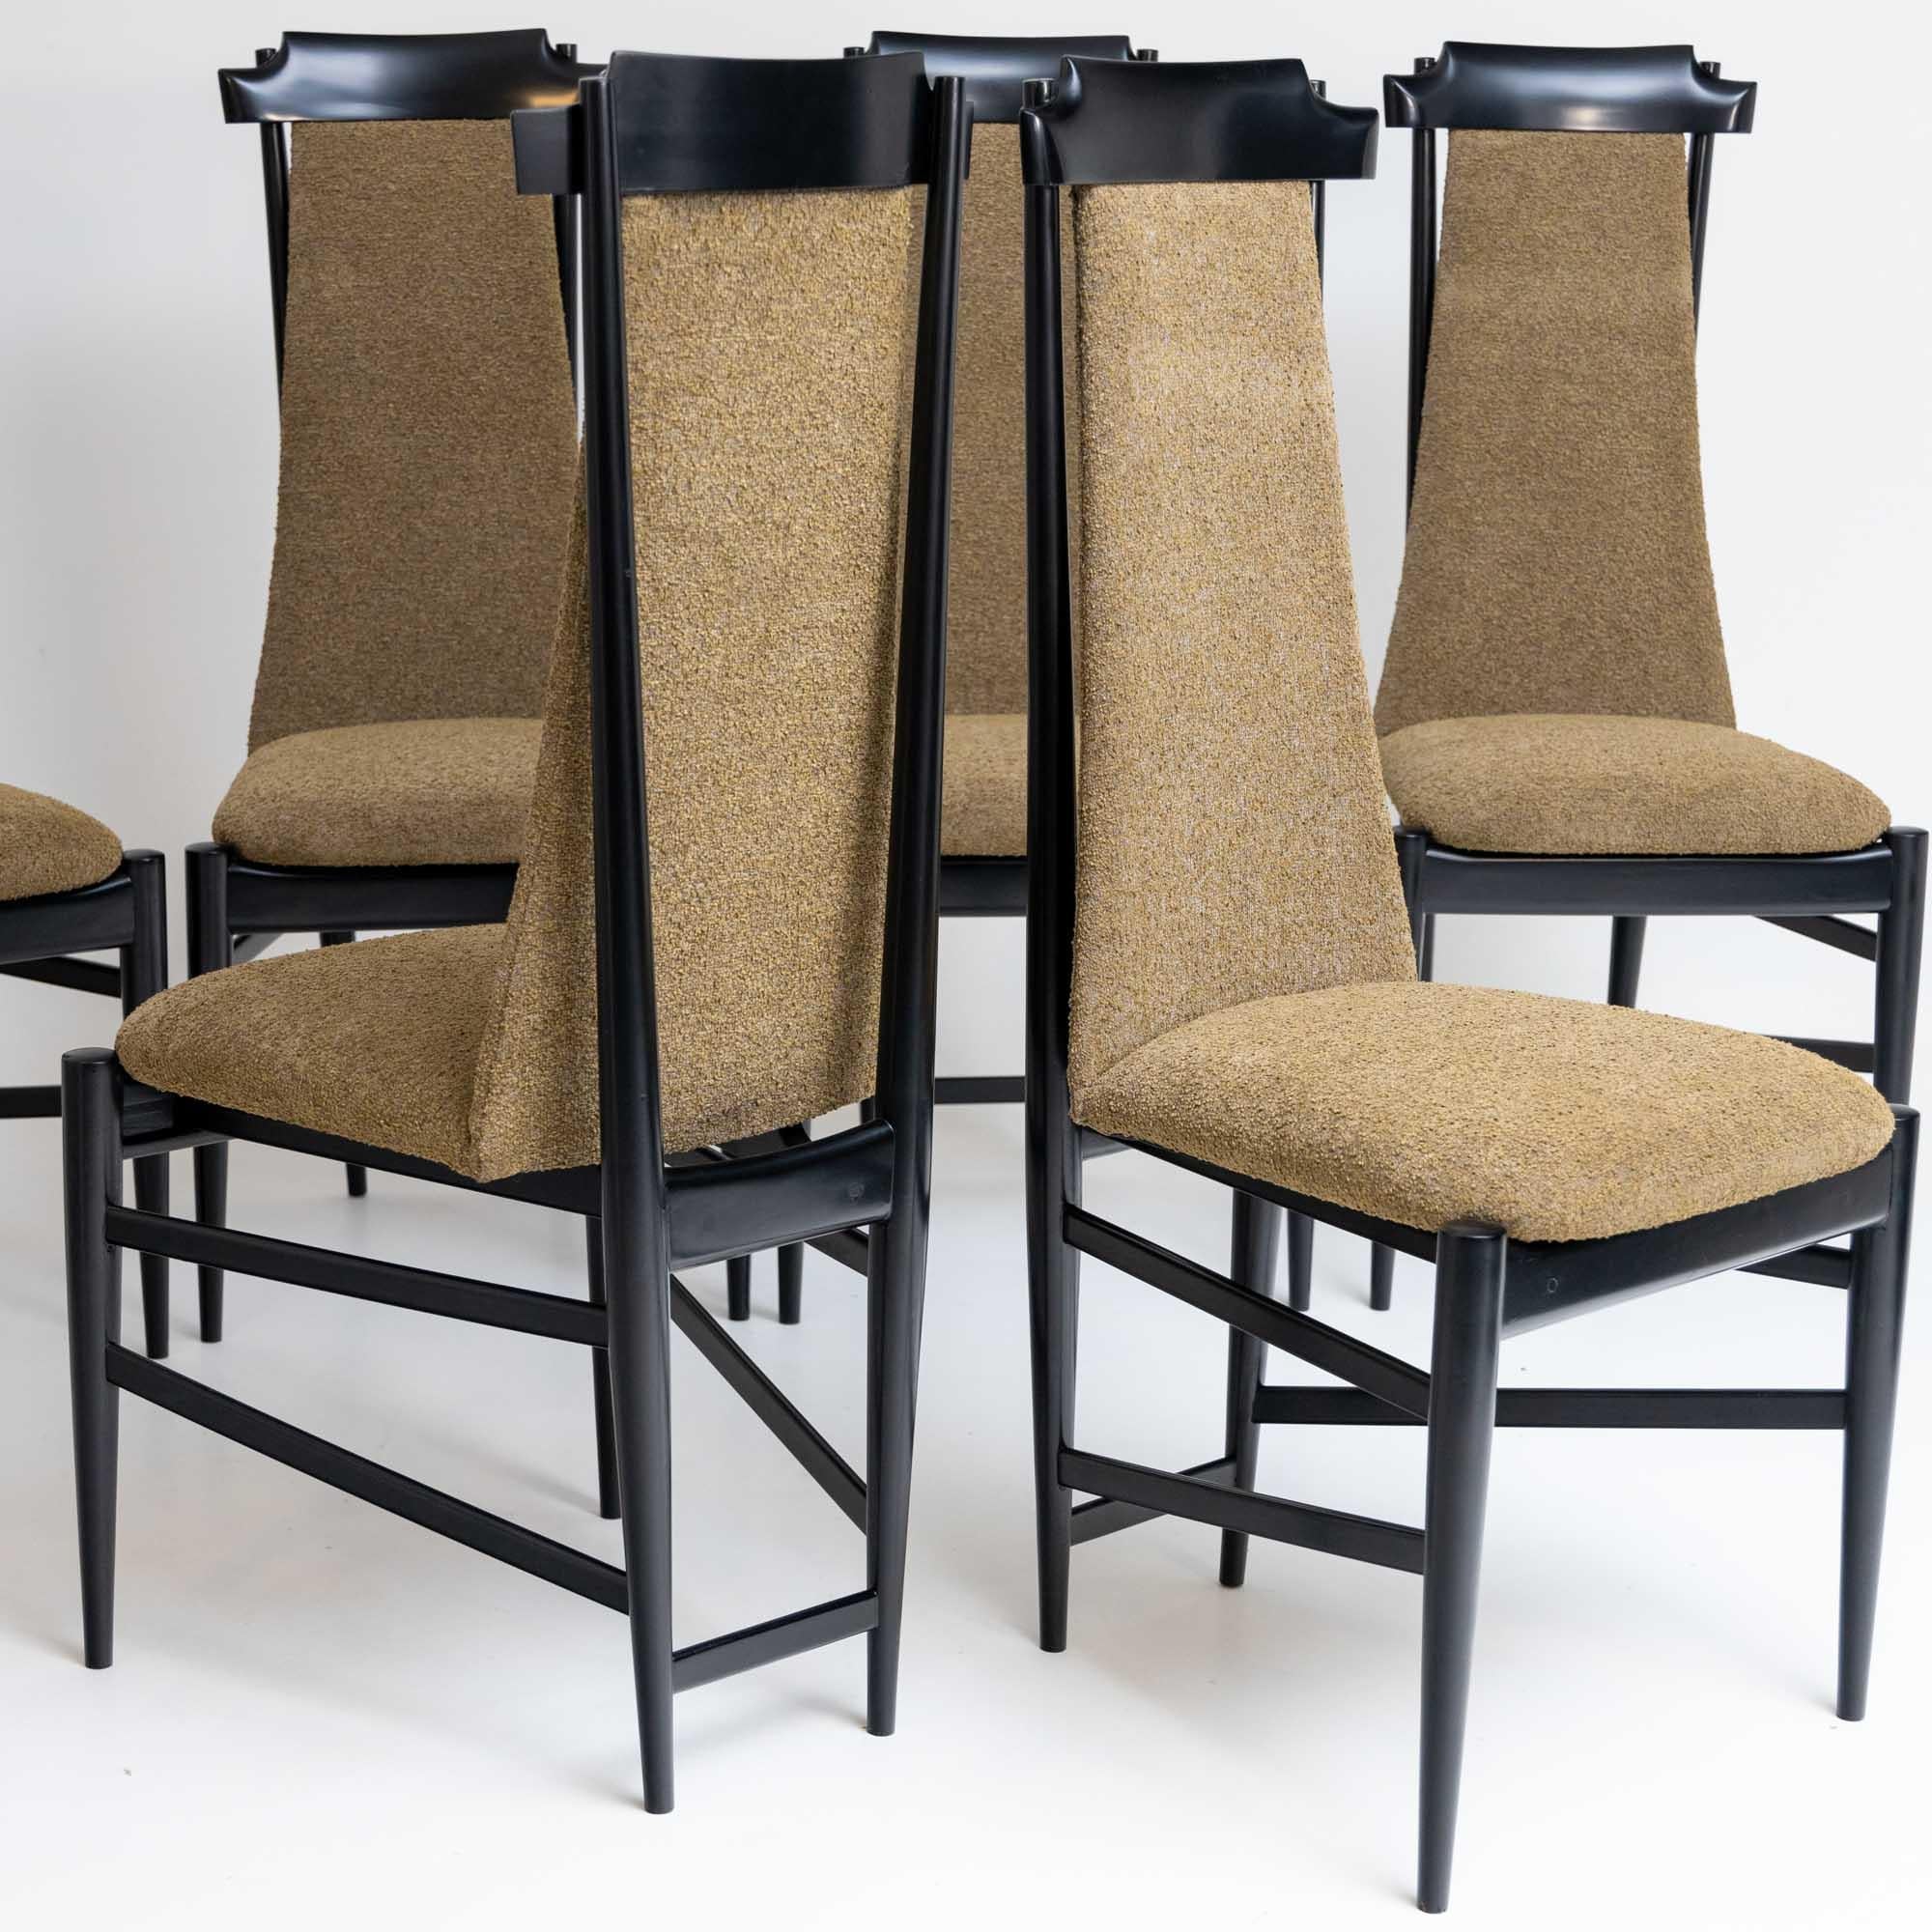 Mid-Century Modern Six chairs by Sergio Rodrigues (Brazil, 1927-2014), Italy 1960s For Sale